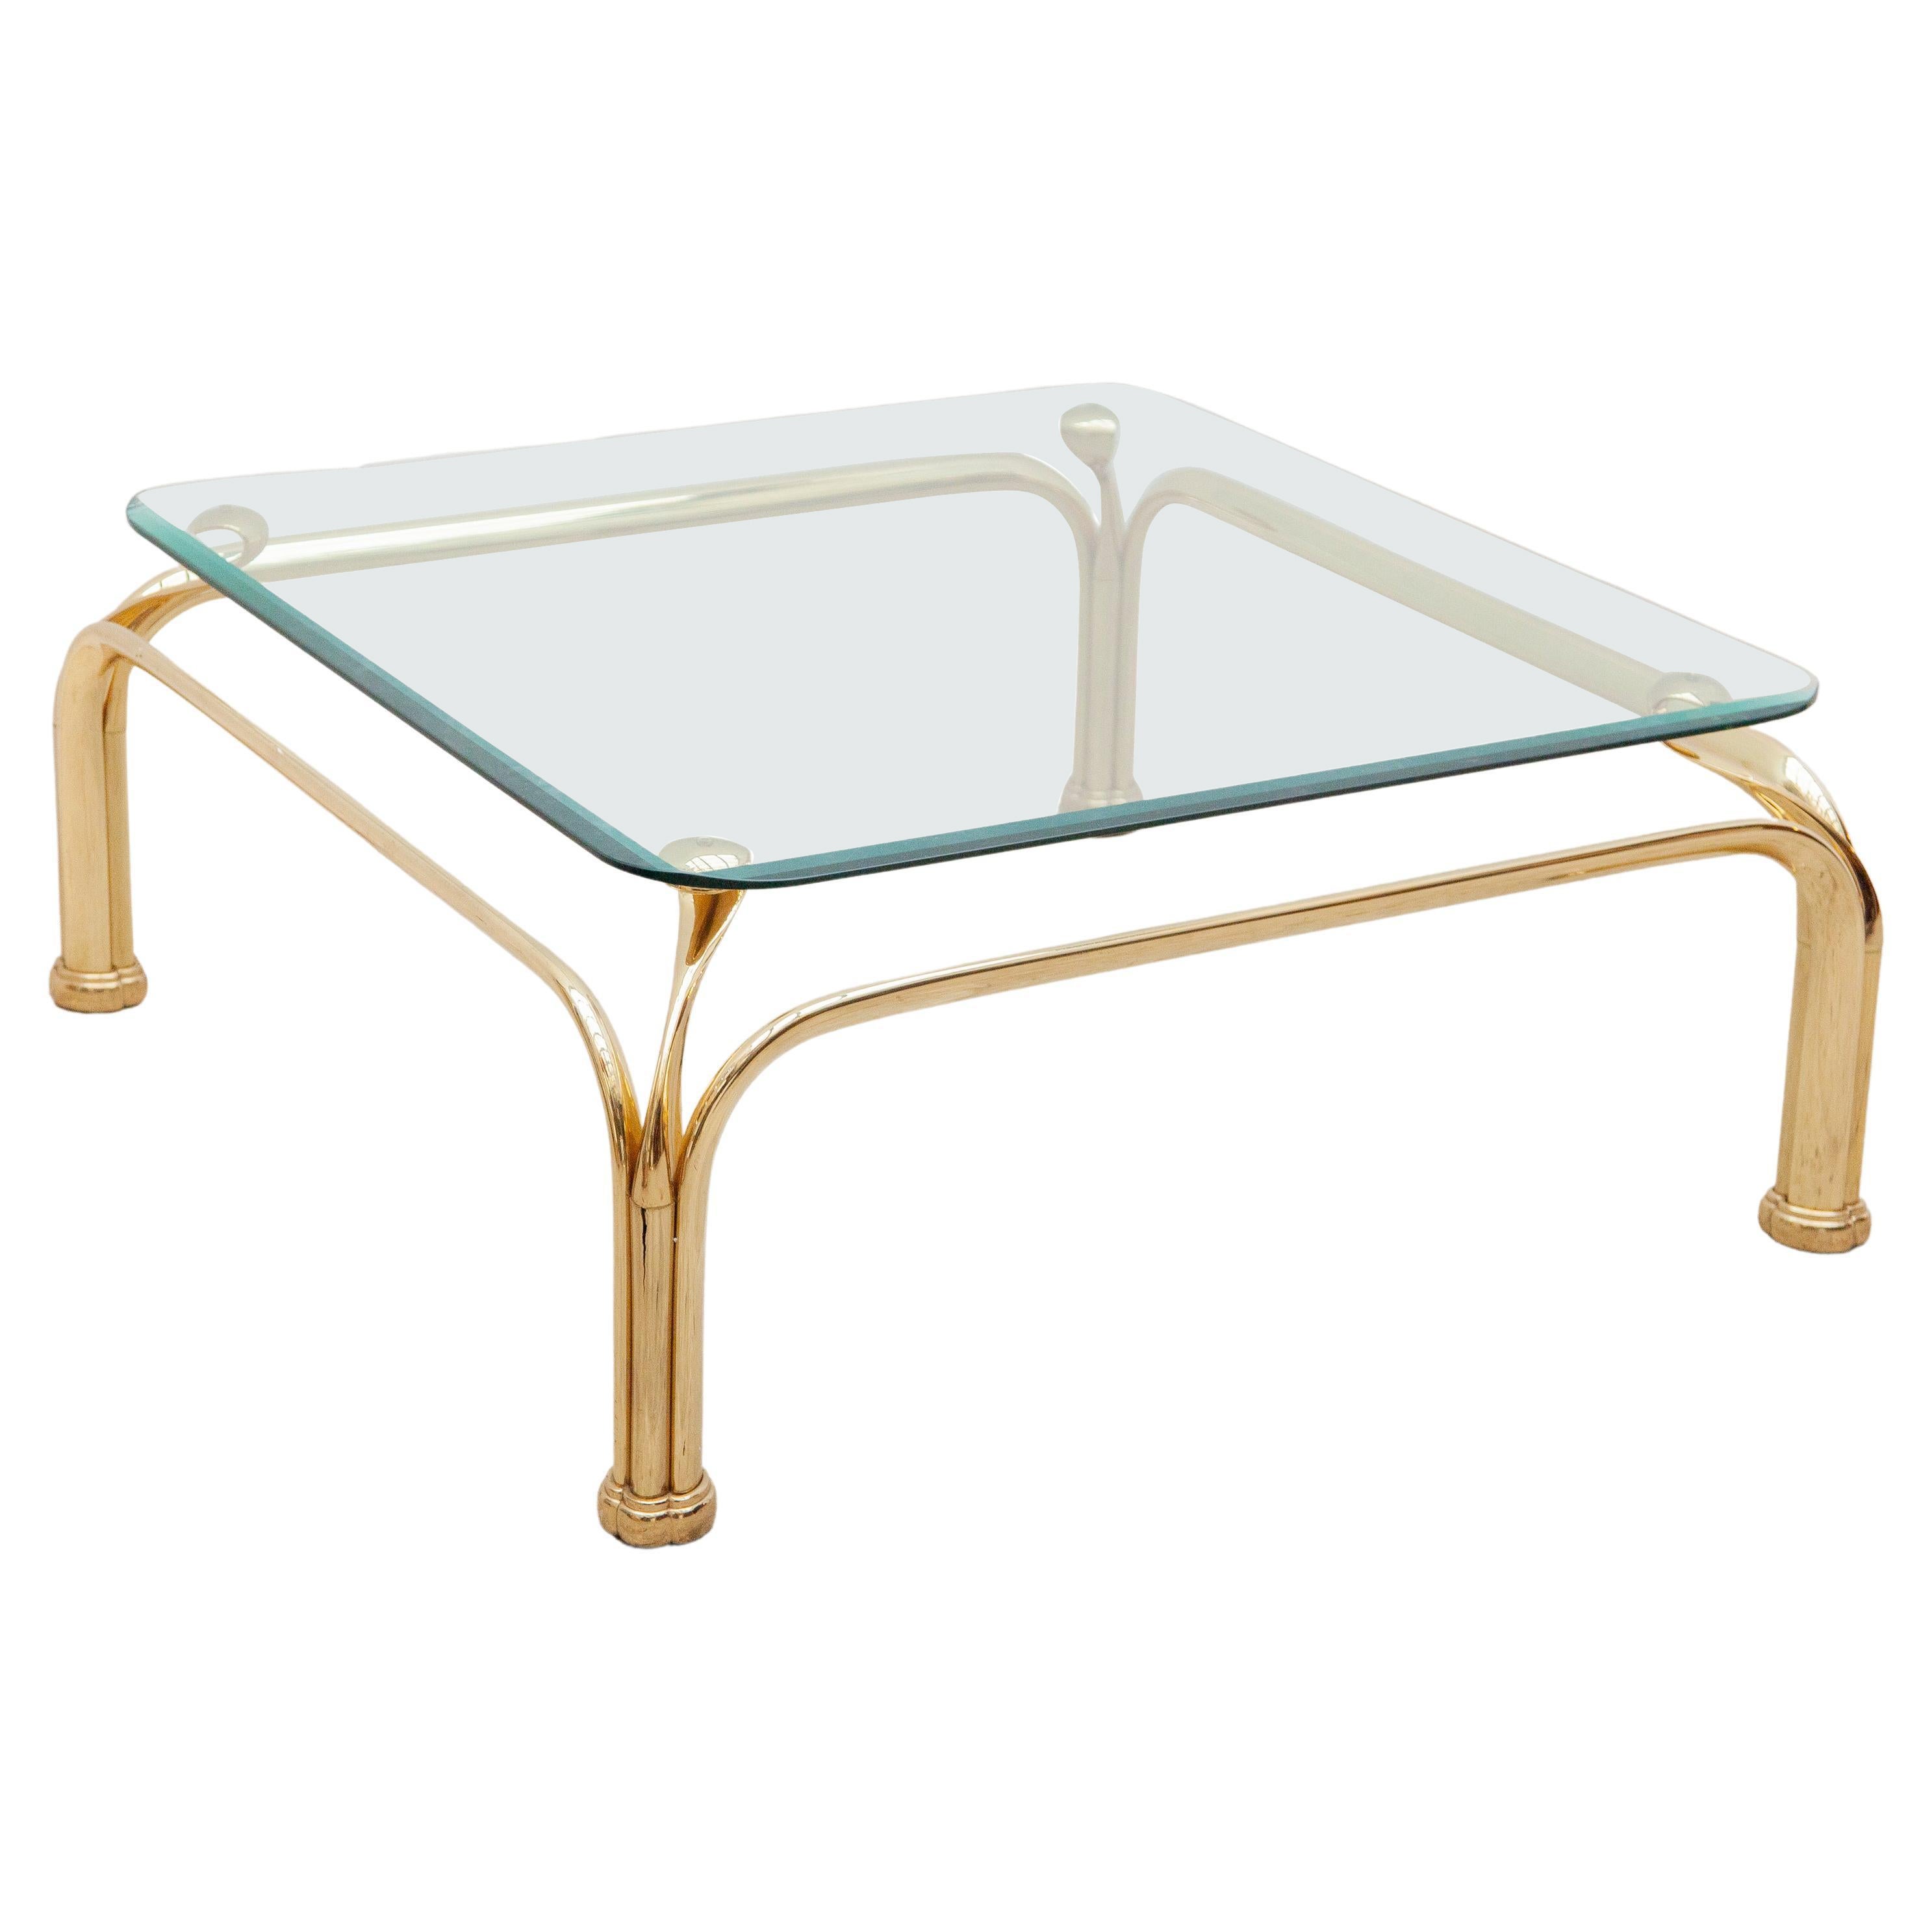 Italian Organic Brass Coffee-Table with Abstract Swan Neck For Sale